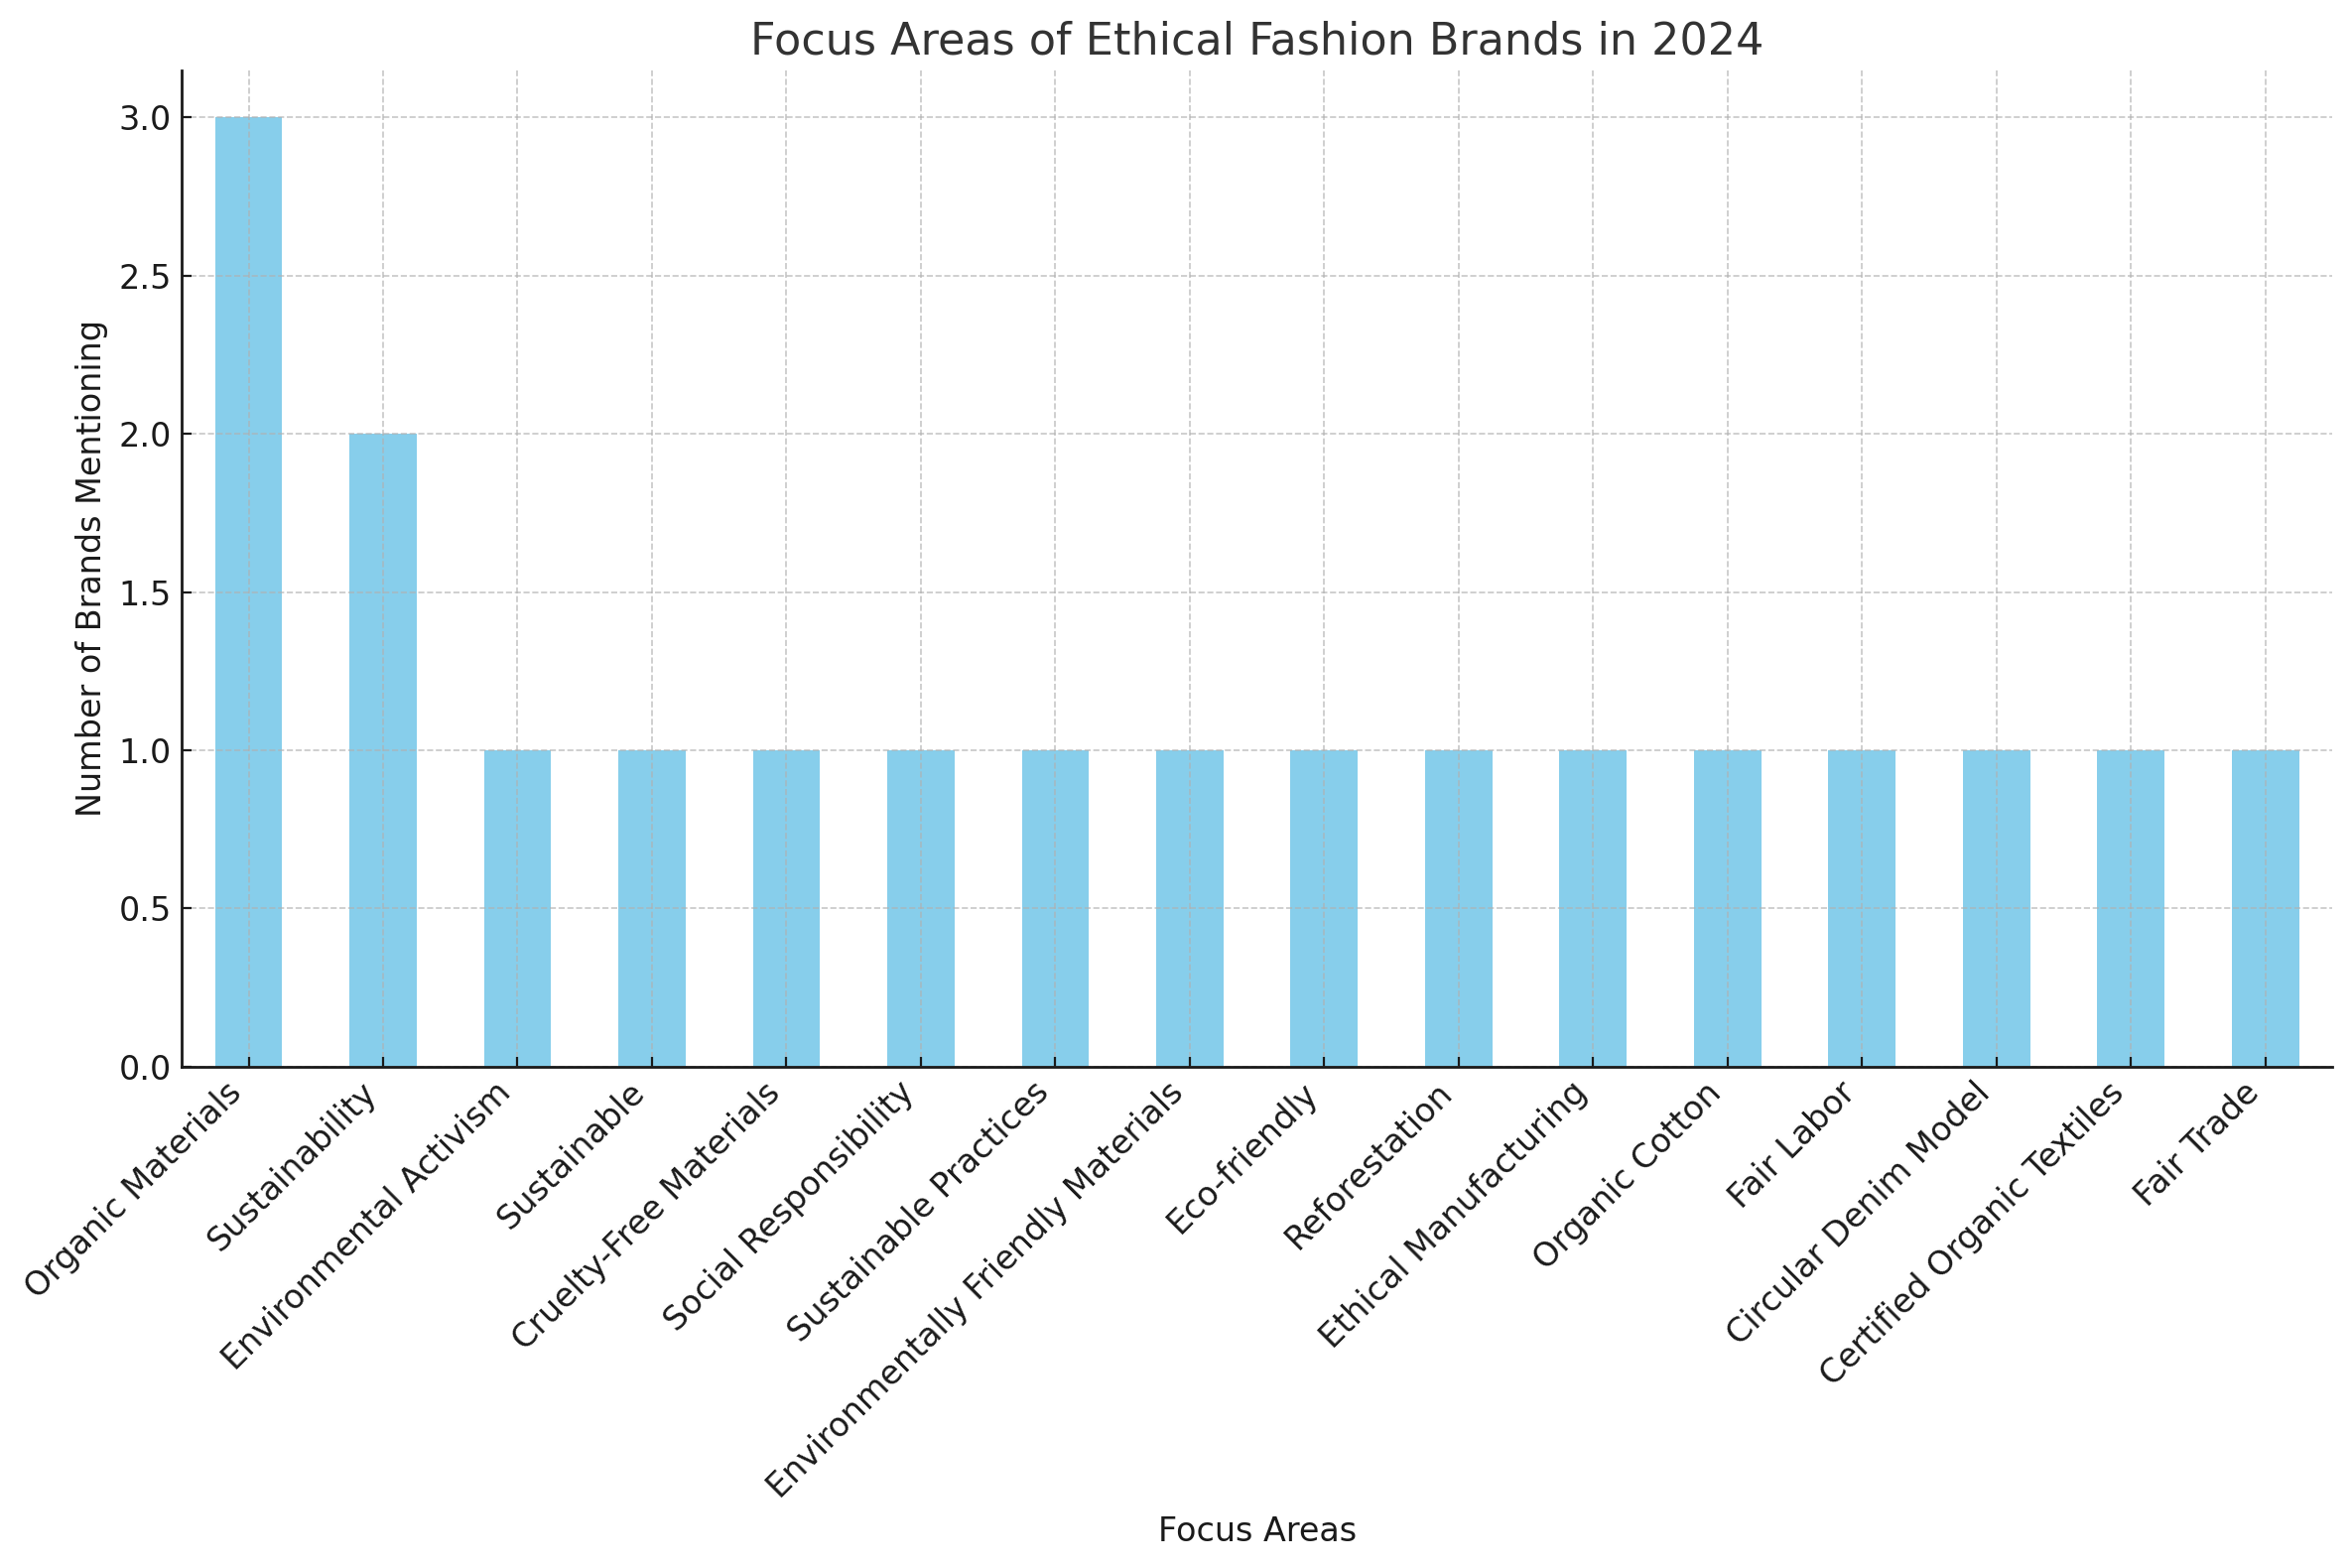 Ethical Fashion Brand Focus Areas